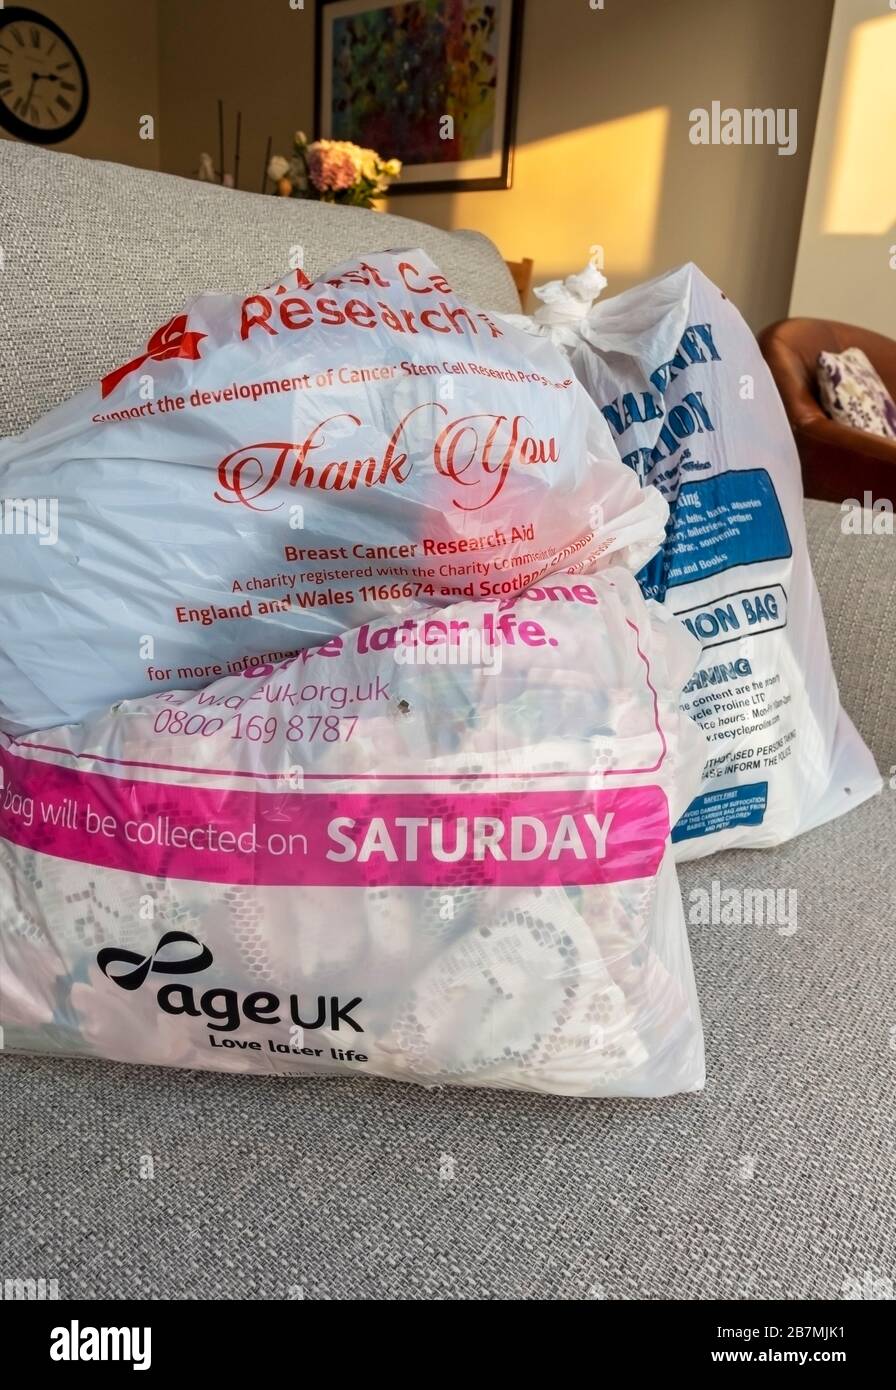 https://c8.alamy.com/comp/2B7MJK1/close-up-of-age-uk-and-other-various-charity-bag-bags-filled-with-clothing-clothes-ready-for-collection-england-uk-united-kingdom-gb-great-britain-2B7MJK1.jpg